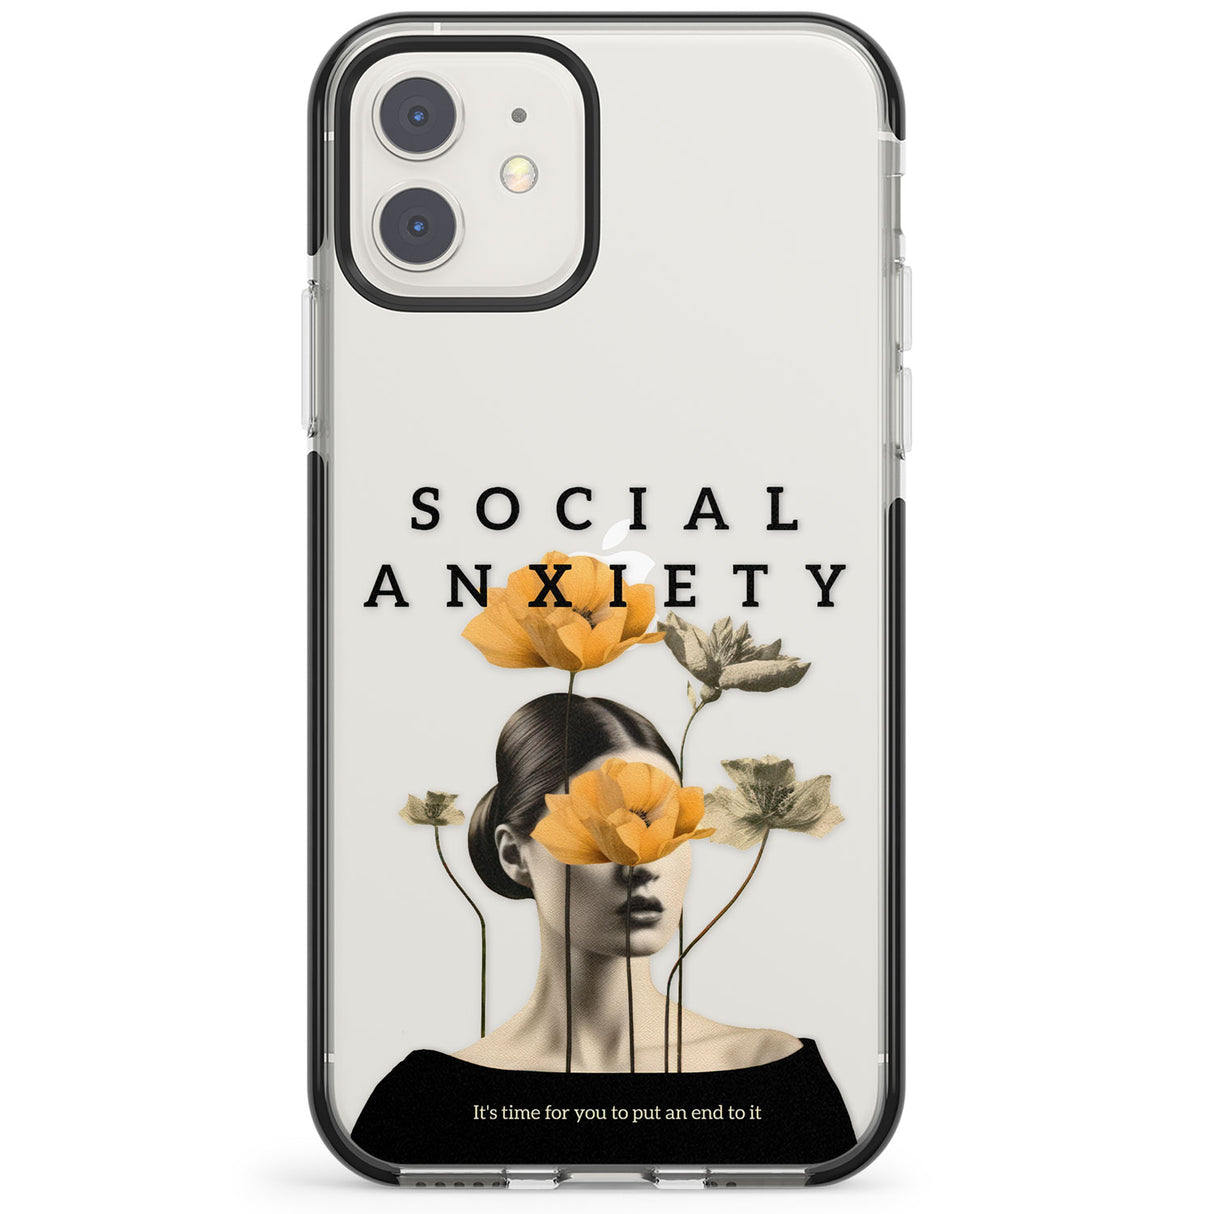 Social Anxiety Impact Phone Case for iPhone 11, iphone 12